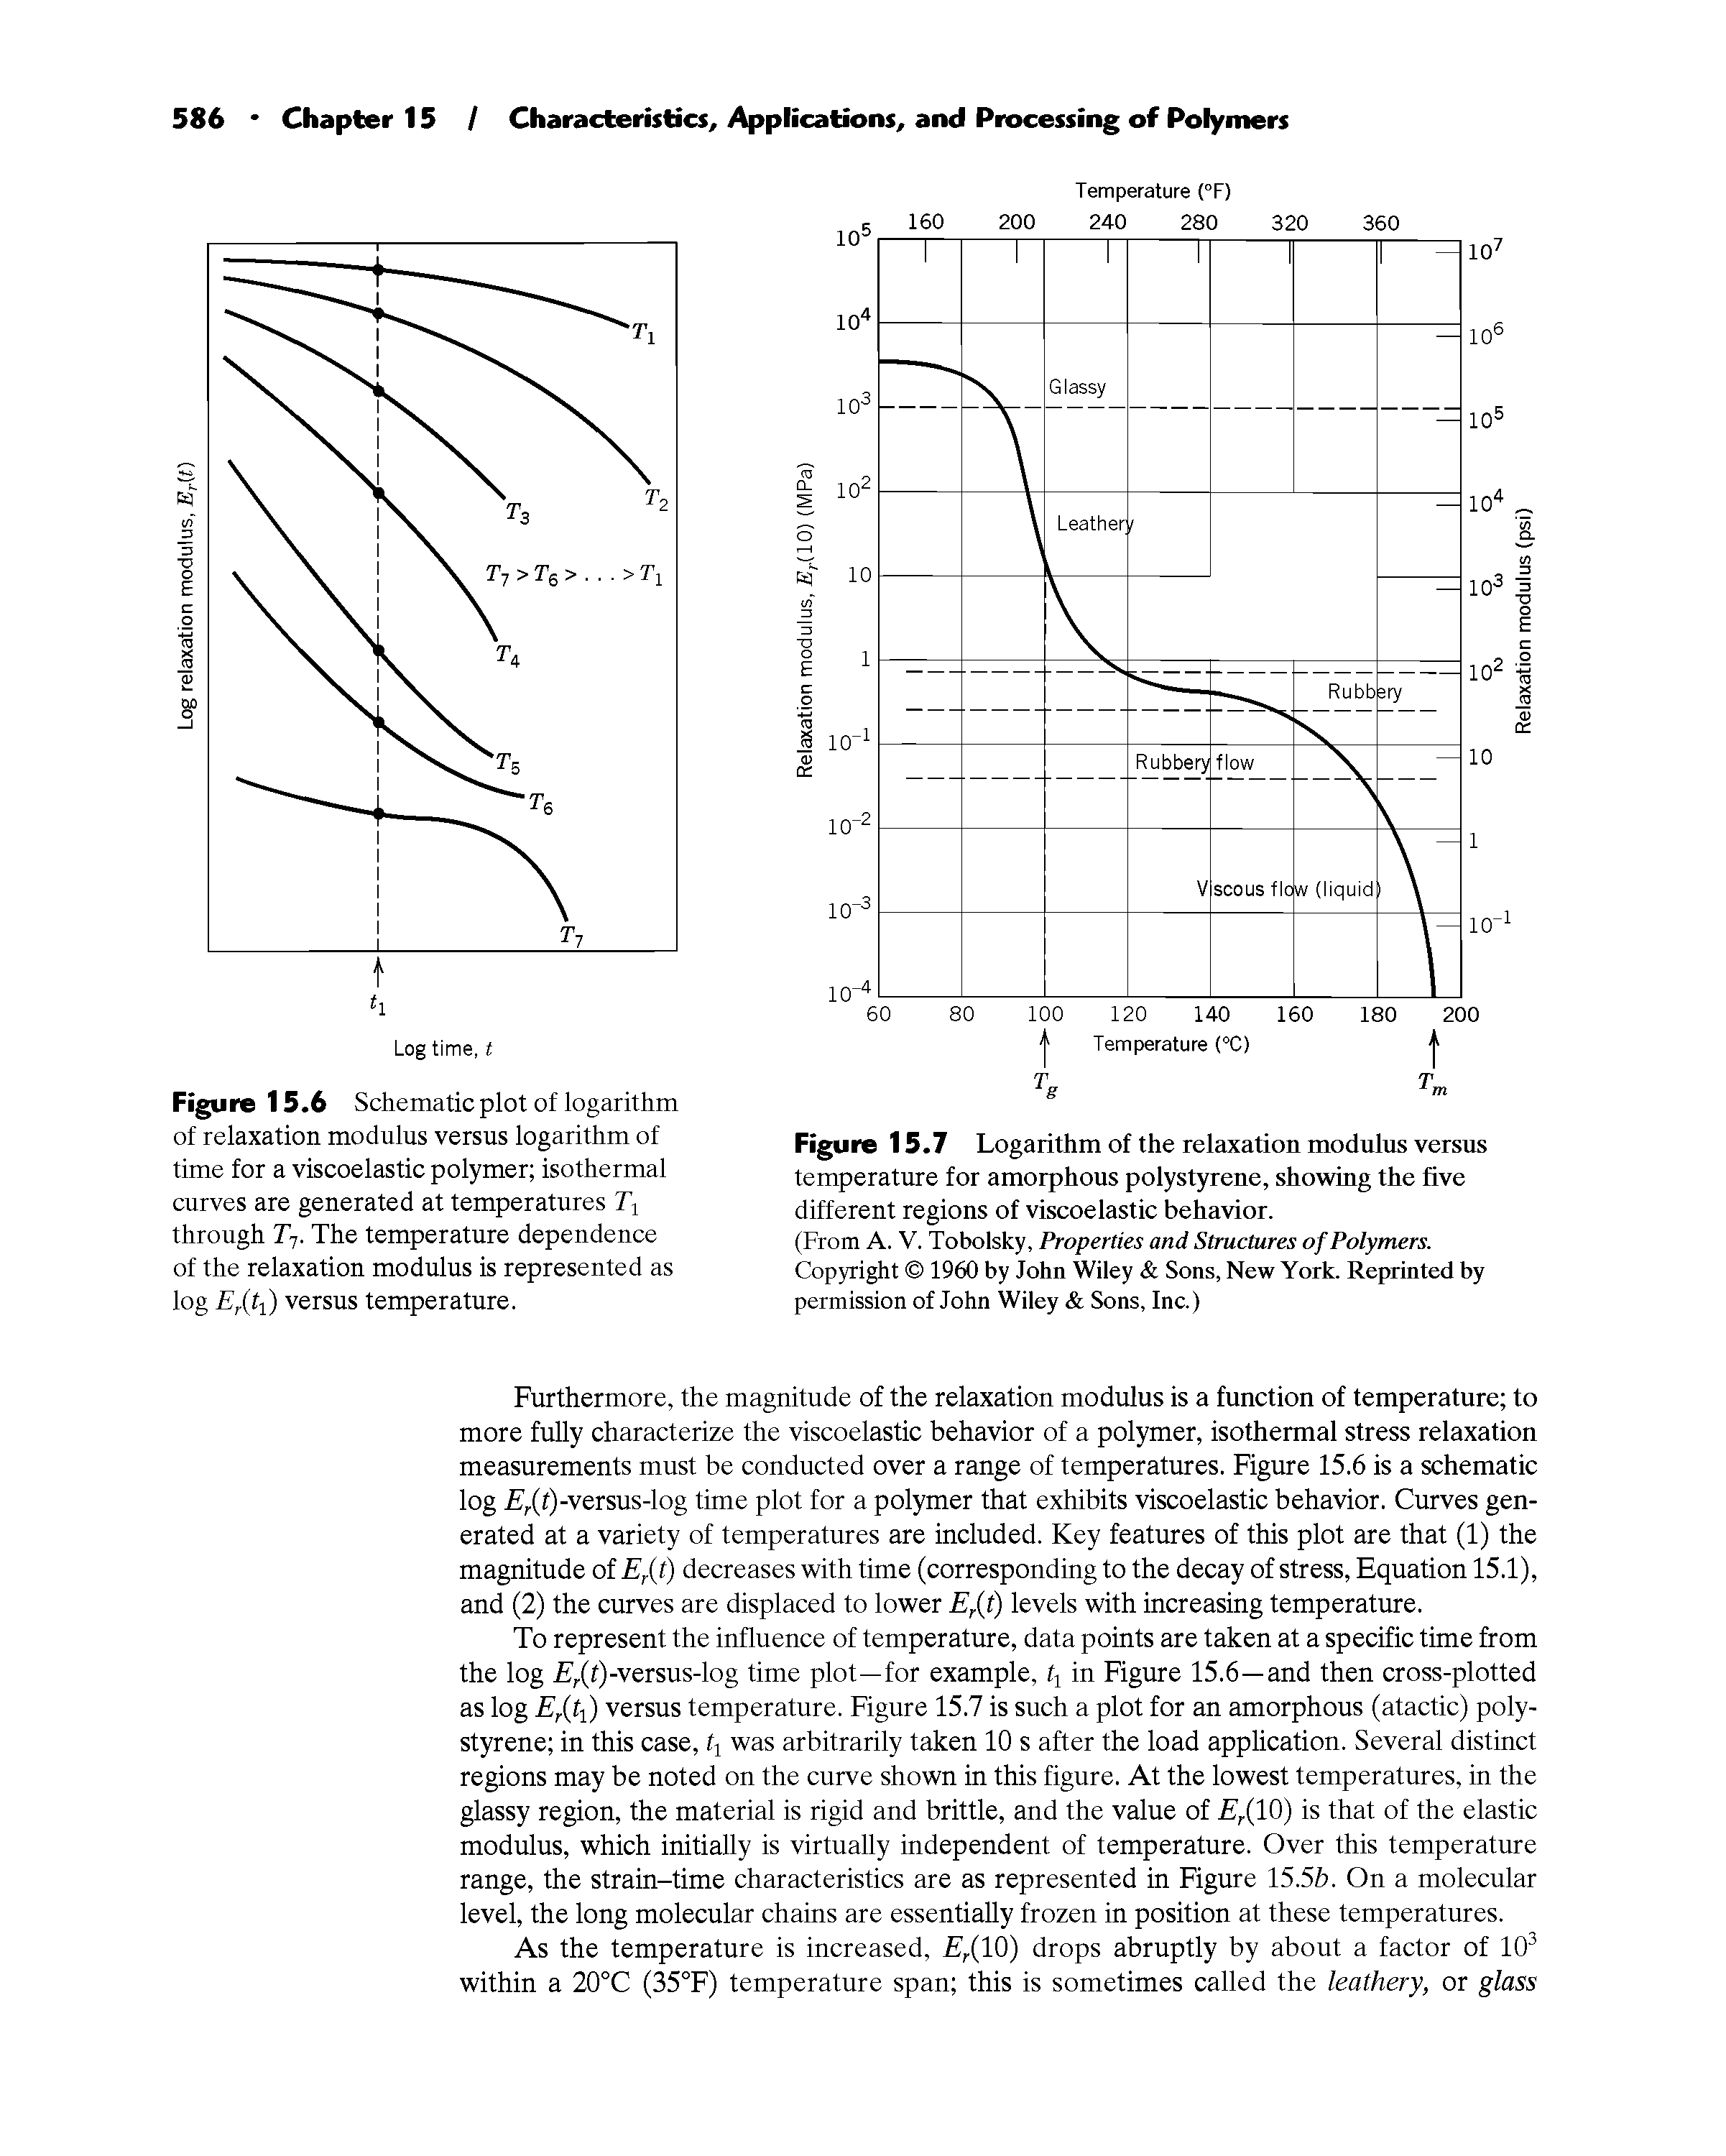 Figure 15.6 Schematic plot of logarithm of relaxation modulus versus logarithm of time for a viscoelastic polymer isothermal curves are generated at temperatures Tj through T-j. The temperature dependence of the relaxation modulus is represented as log EXh) versus temperature.